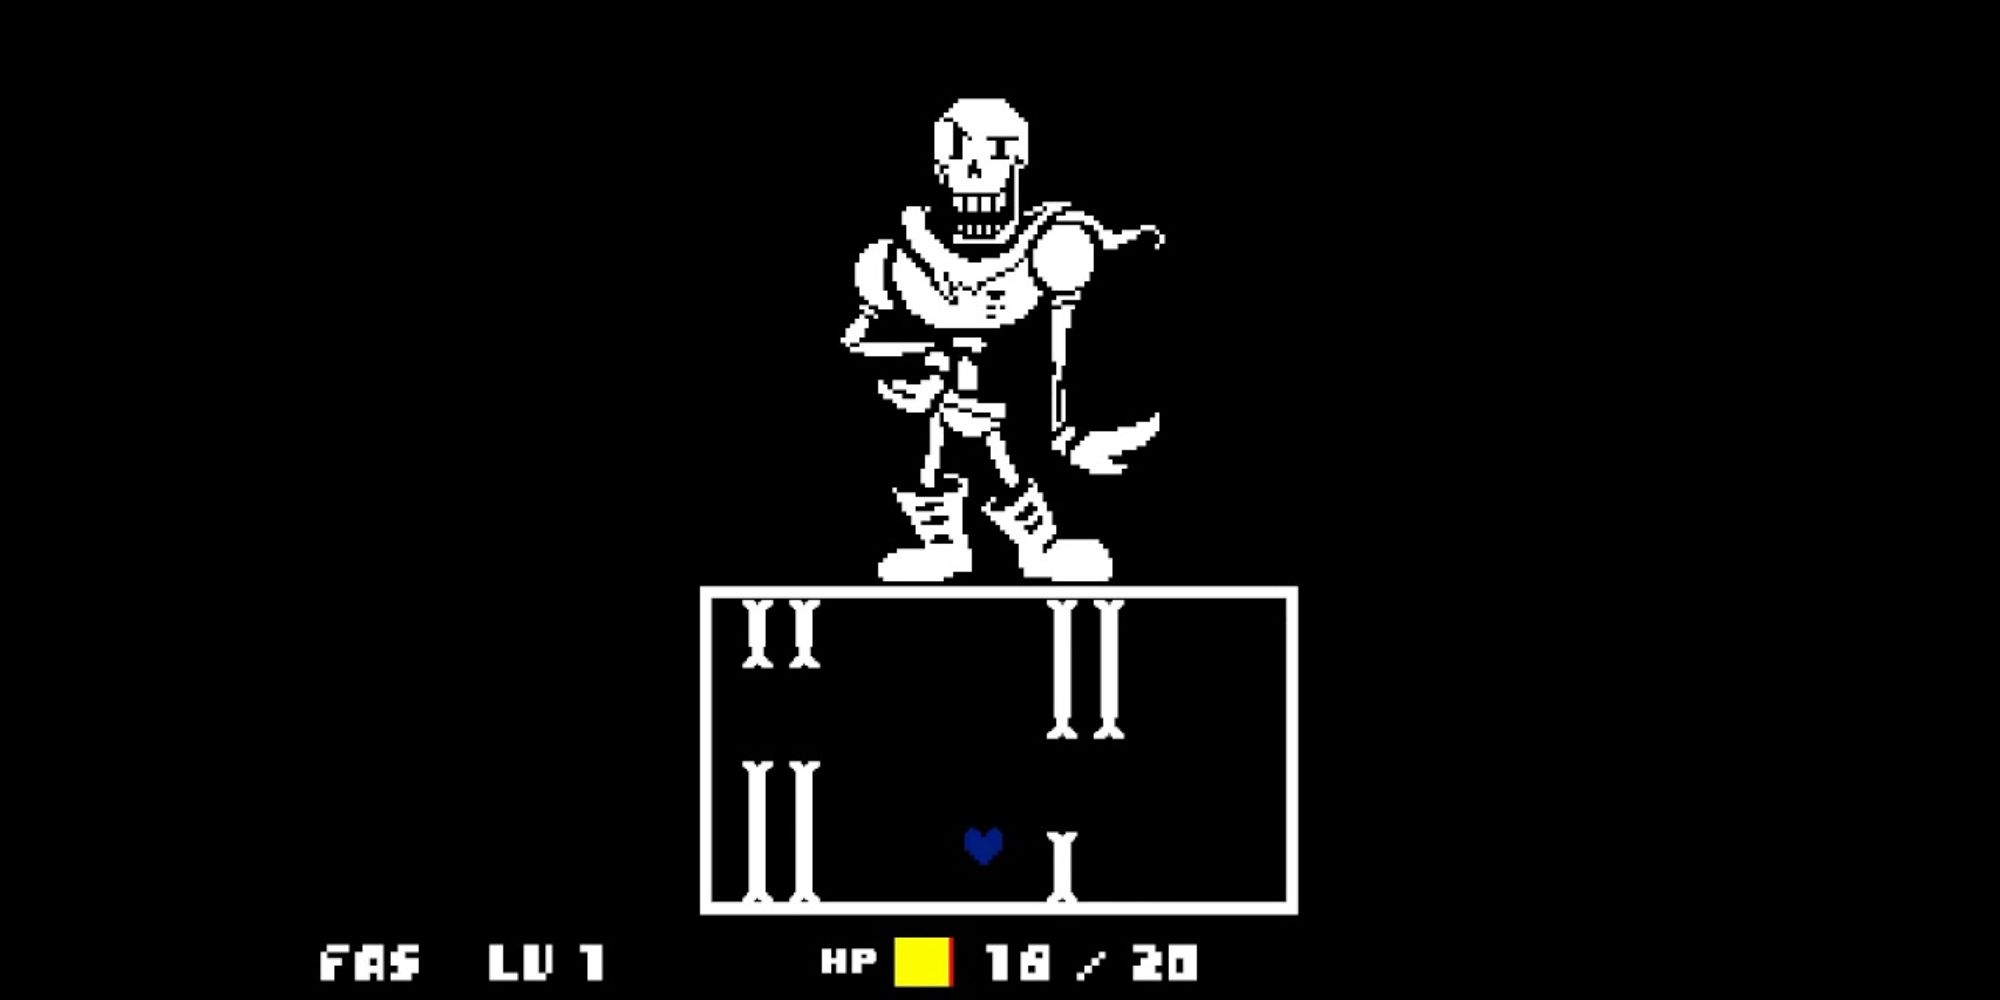 Papyrus's fight in Undertale